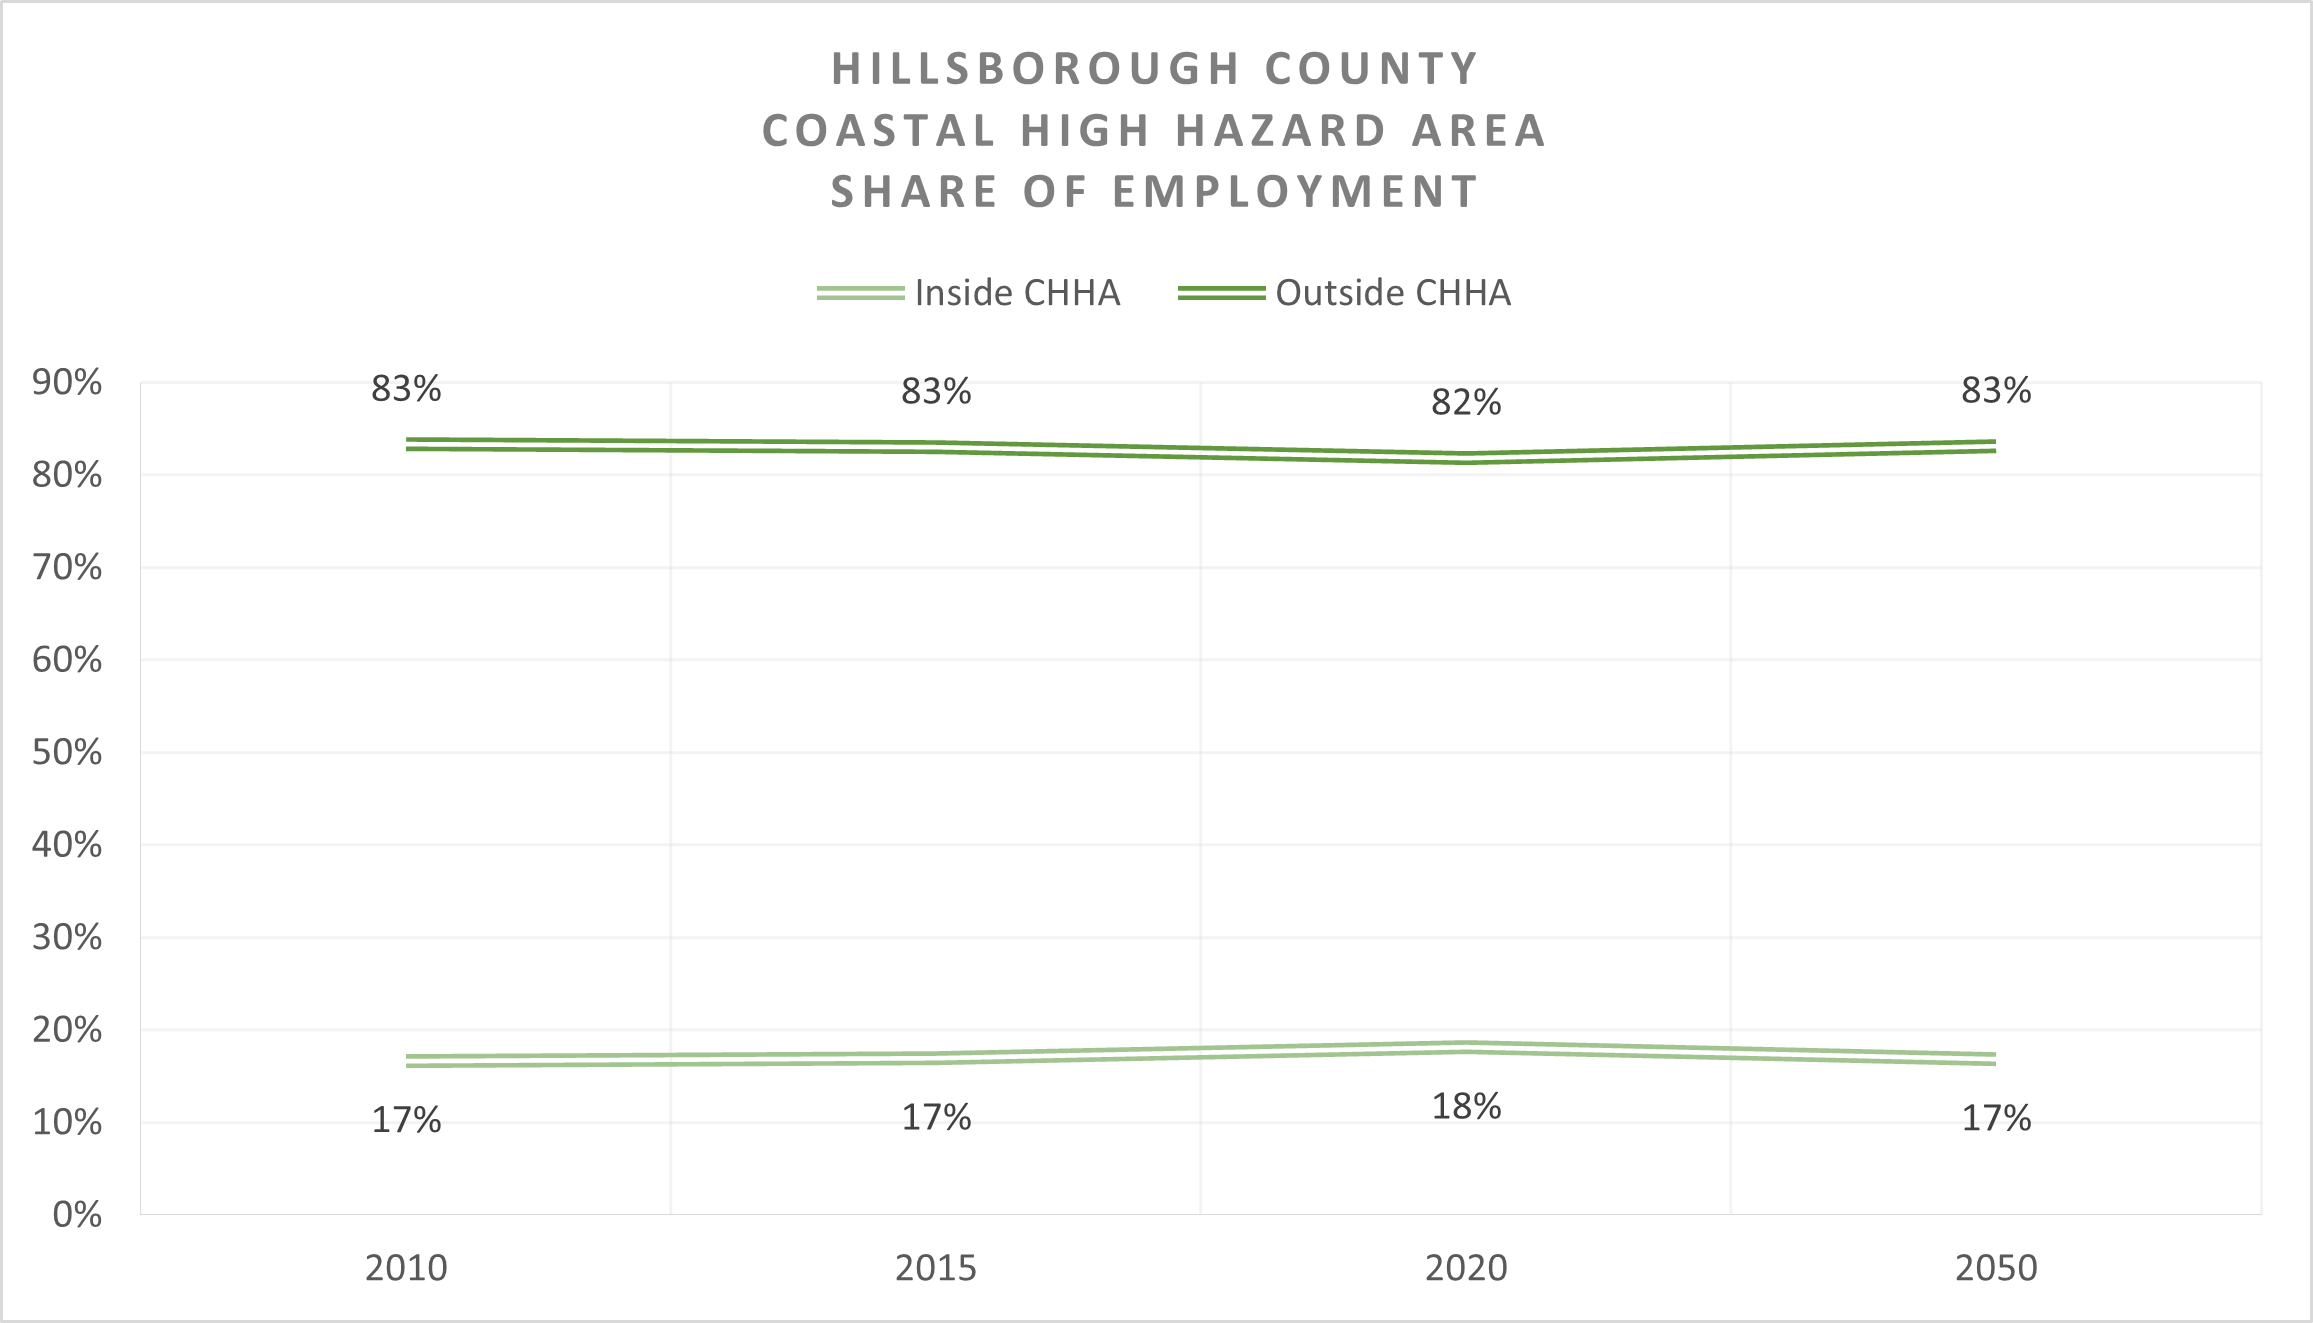 This chart shows Hillsborough County's share of jobs inside and outside the CHHA. Currently, 18% of the jobs are inside the CHHA and 82% of the jobs are outside CHHA. By 2050, the share of jobs inside the CHHA is expected to decrease slightly. Namely, 17% of the jobs will be inside the CHHA and 83% of the jobs will be outside CHHA.